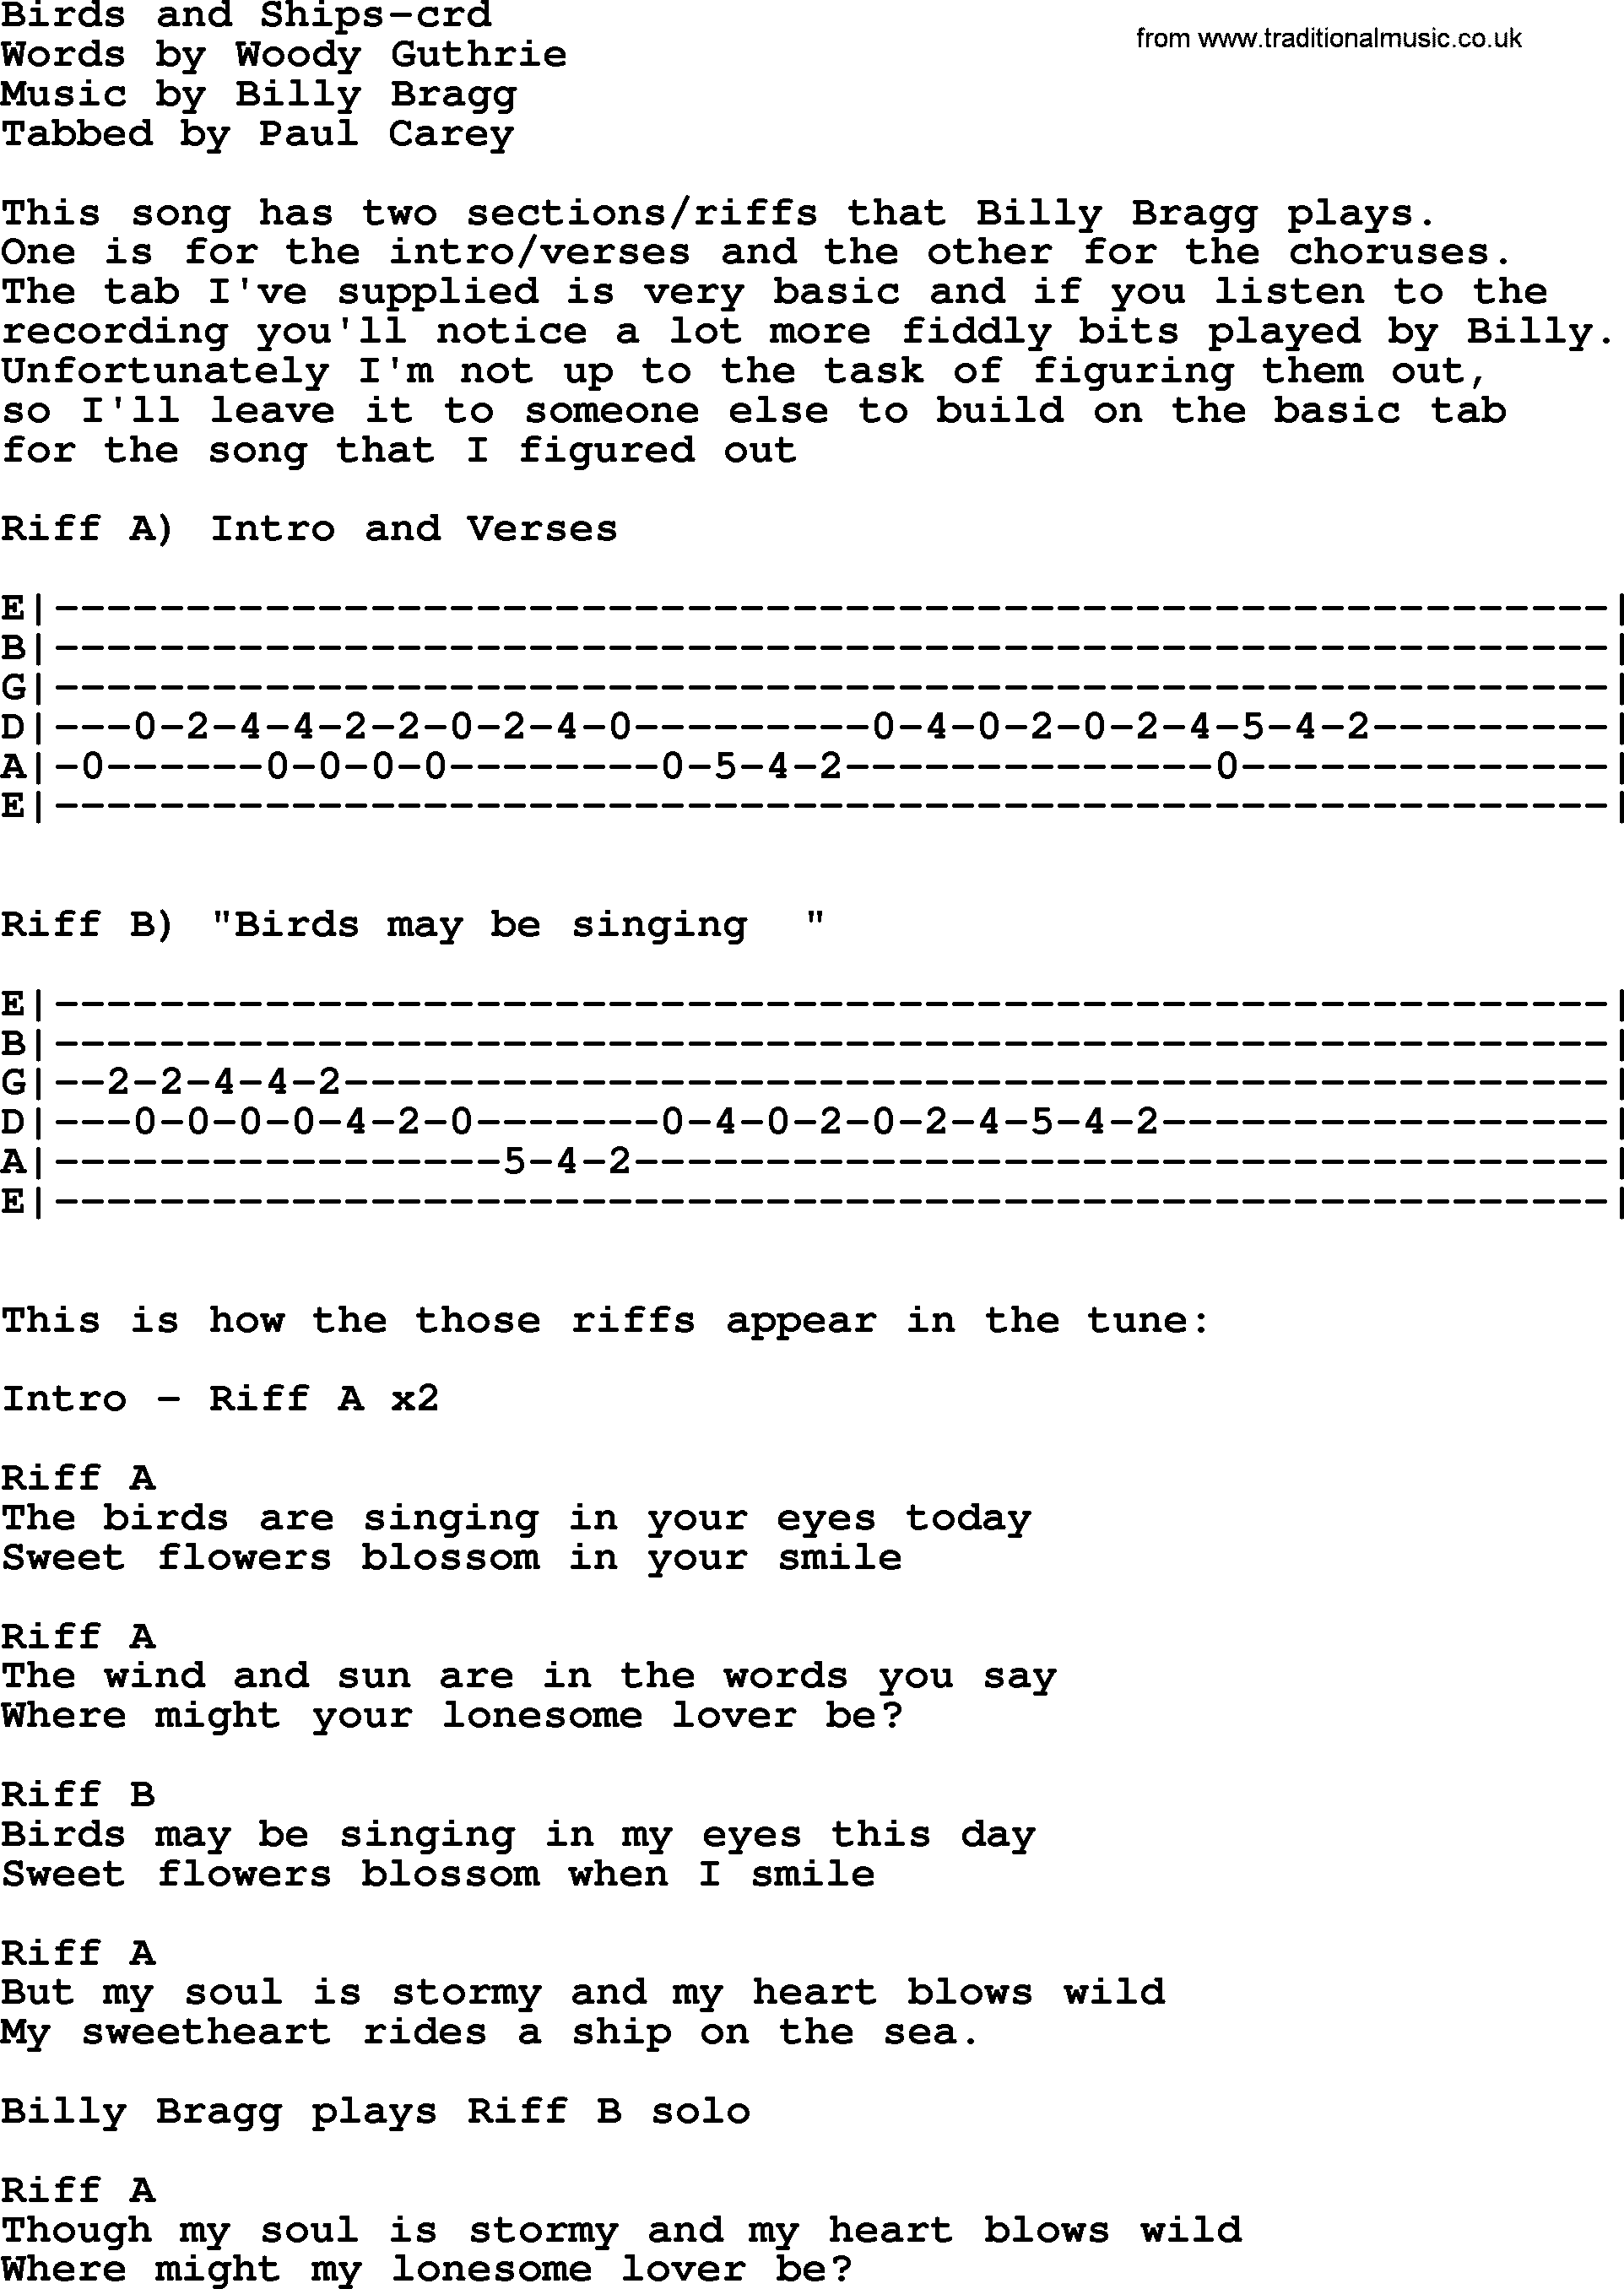 Woody Guthrie song Birds And Ships lyrics and chords